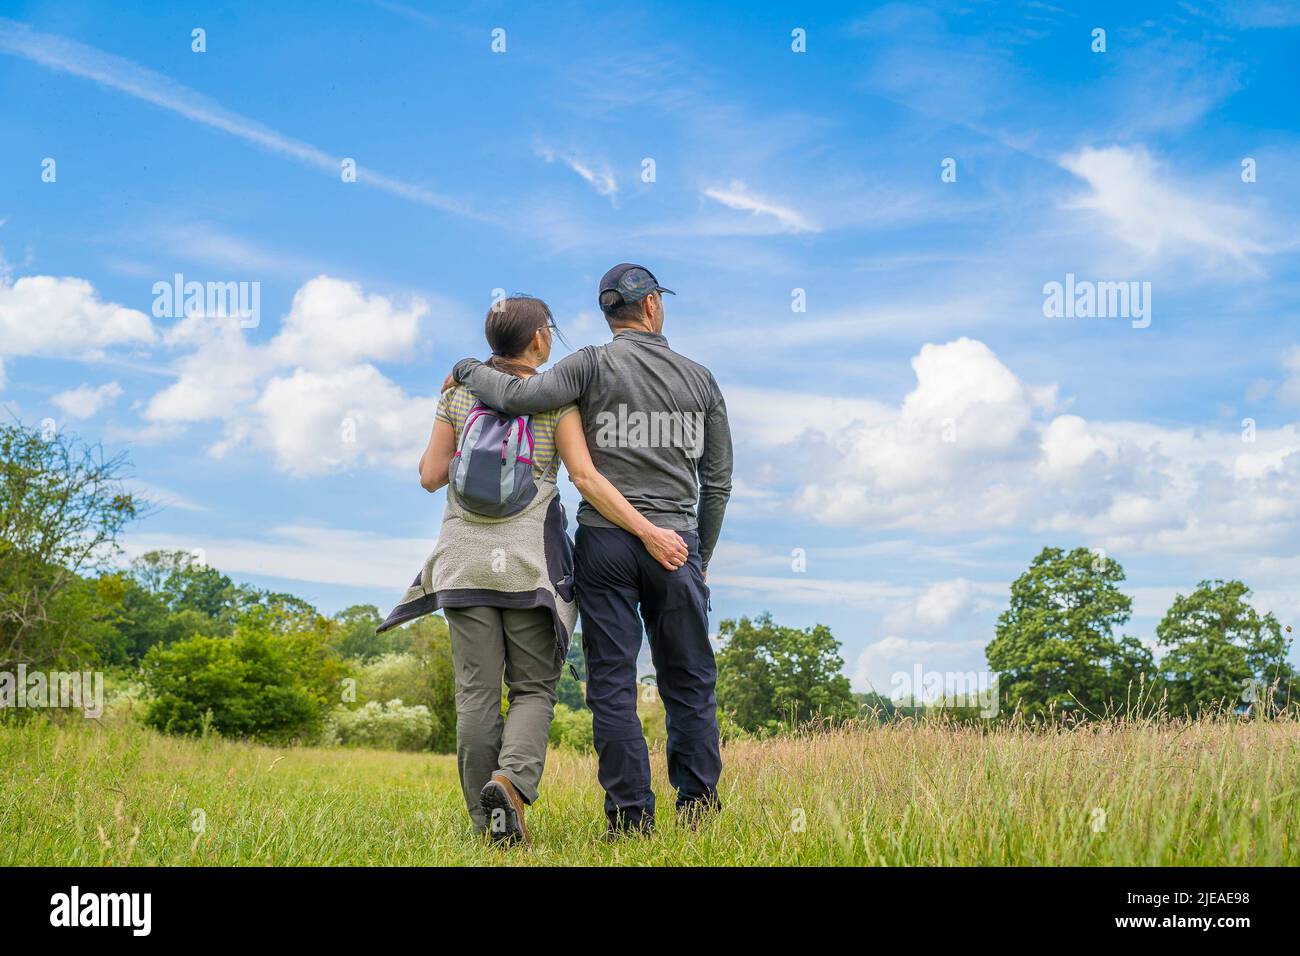 Kidderminster, UK. 26th June, 2022. UK weather: sunny weather and warm temperatures entice walkers for a stroll in the Worcestershire countryside. A couple, arms around each other, walk through a country meadow, stopping to enjoy the nature around them, with blue skies above. Credit: Lee Hudson/Alamy Live News Stock Photo